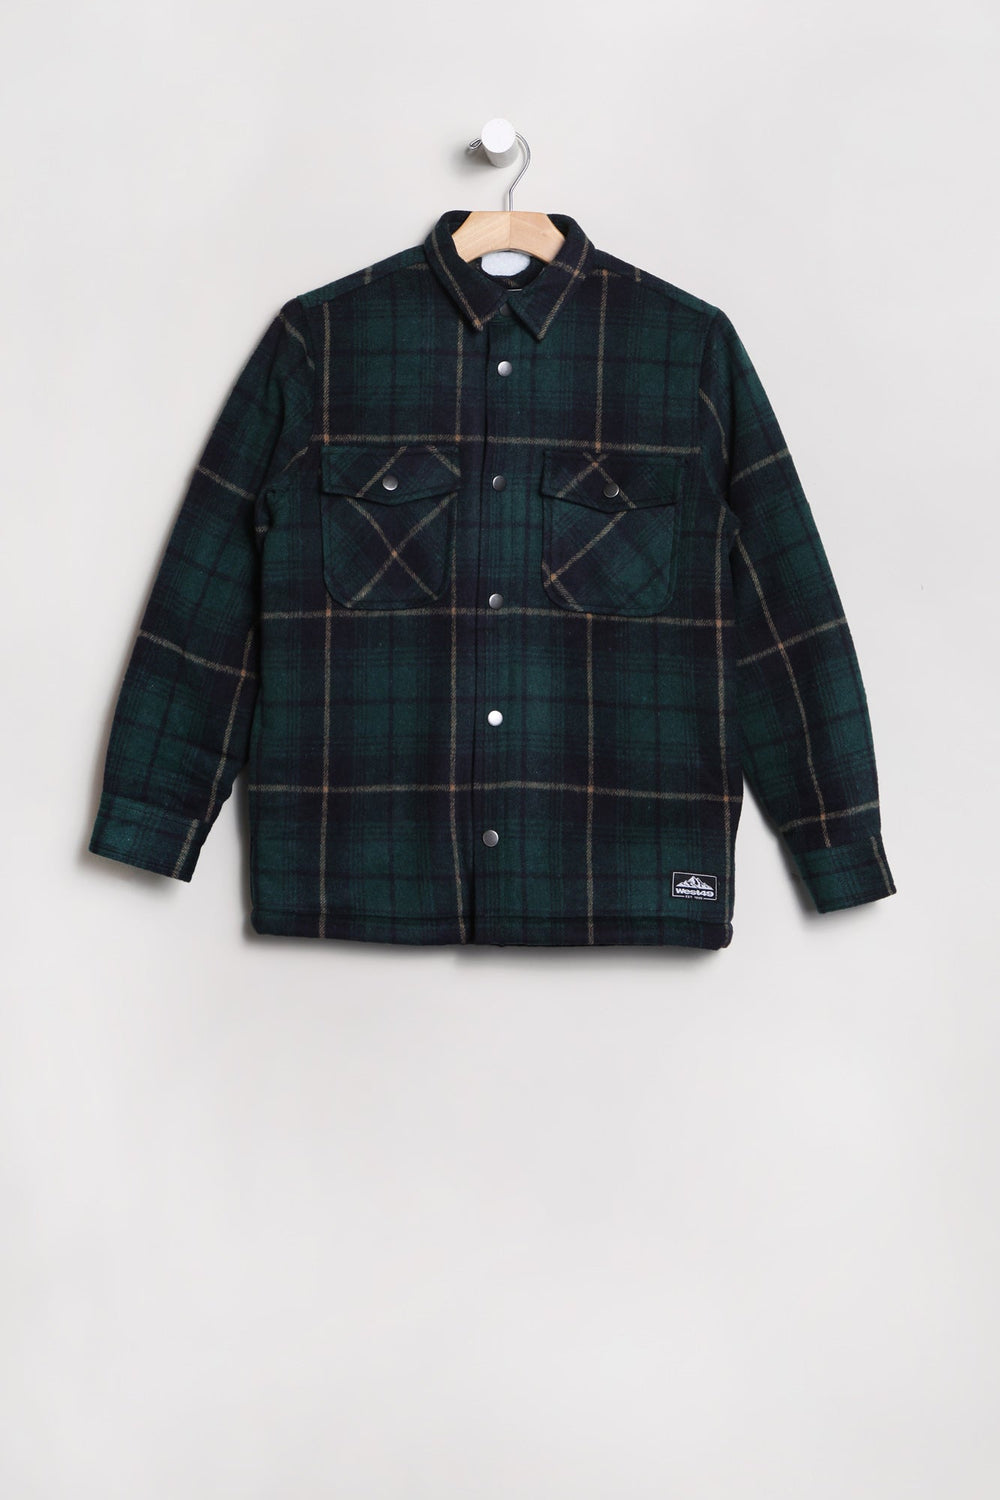 West49 Youth Sherpa Lined Flannel Shacket Green